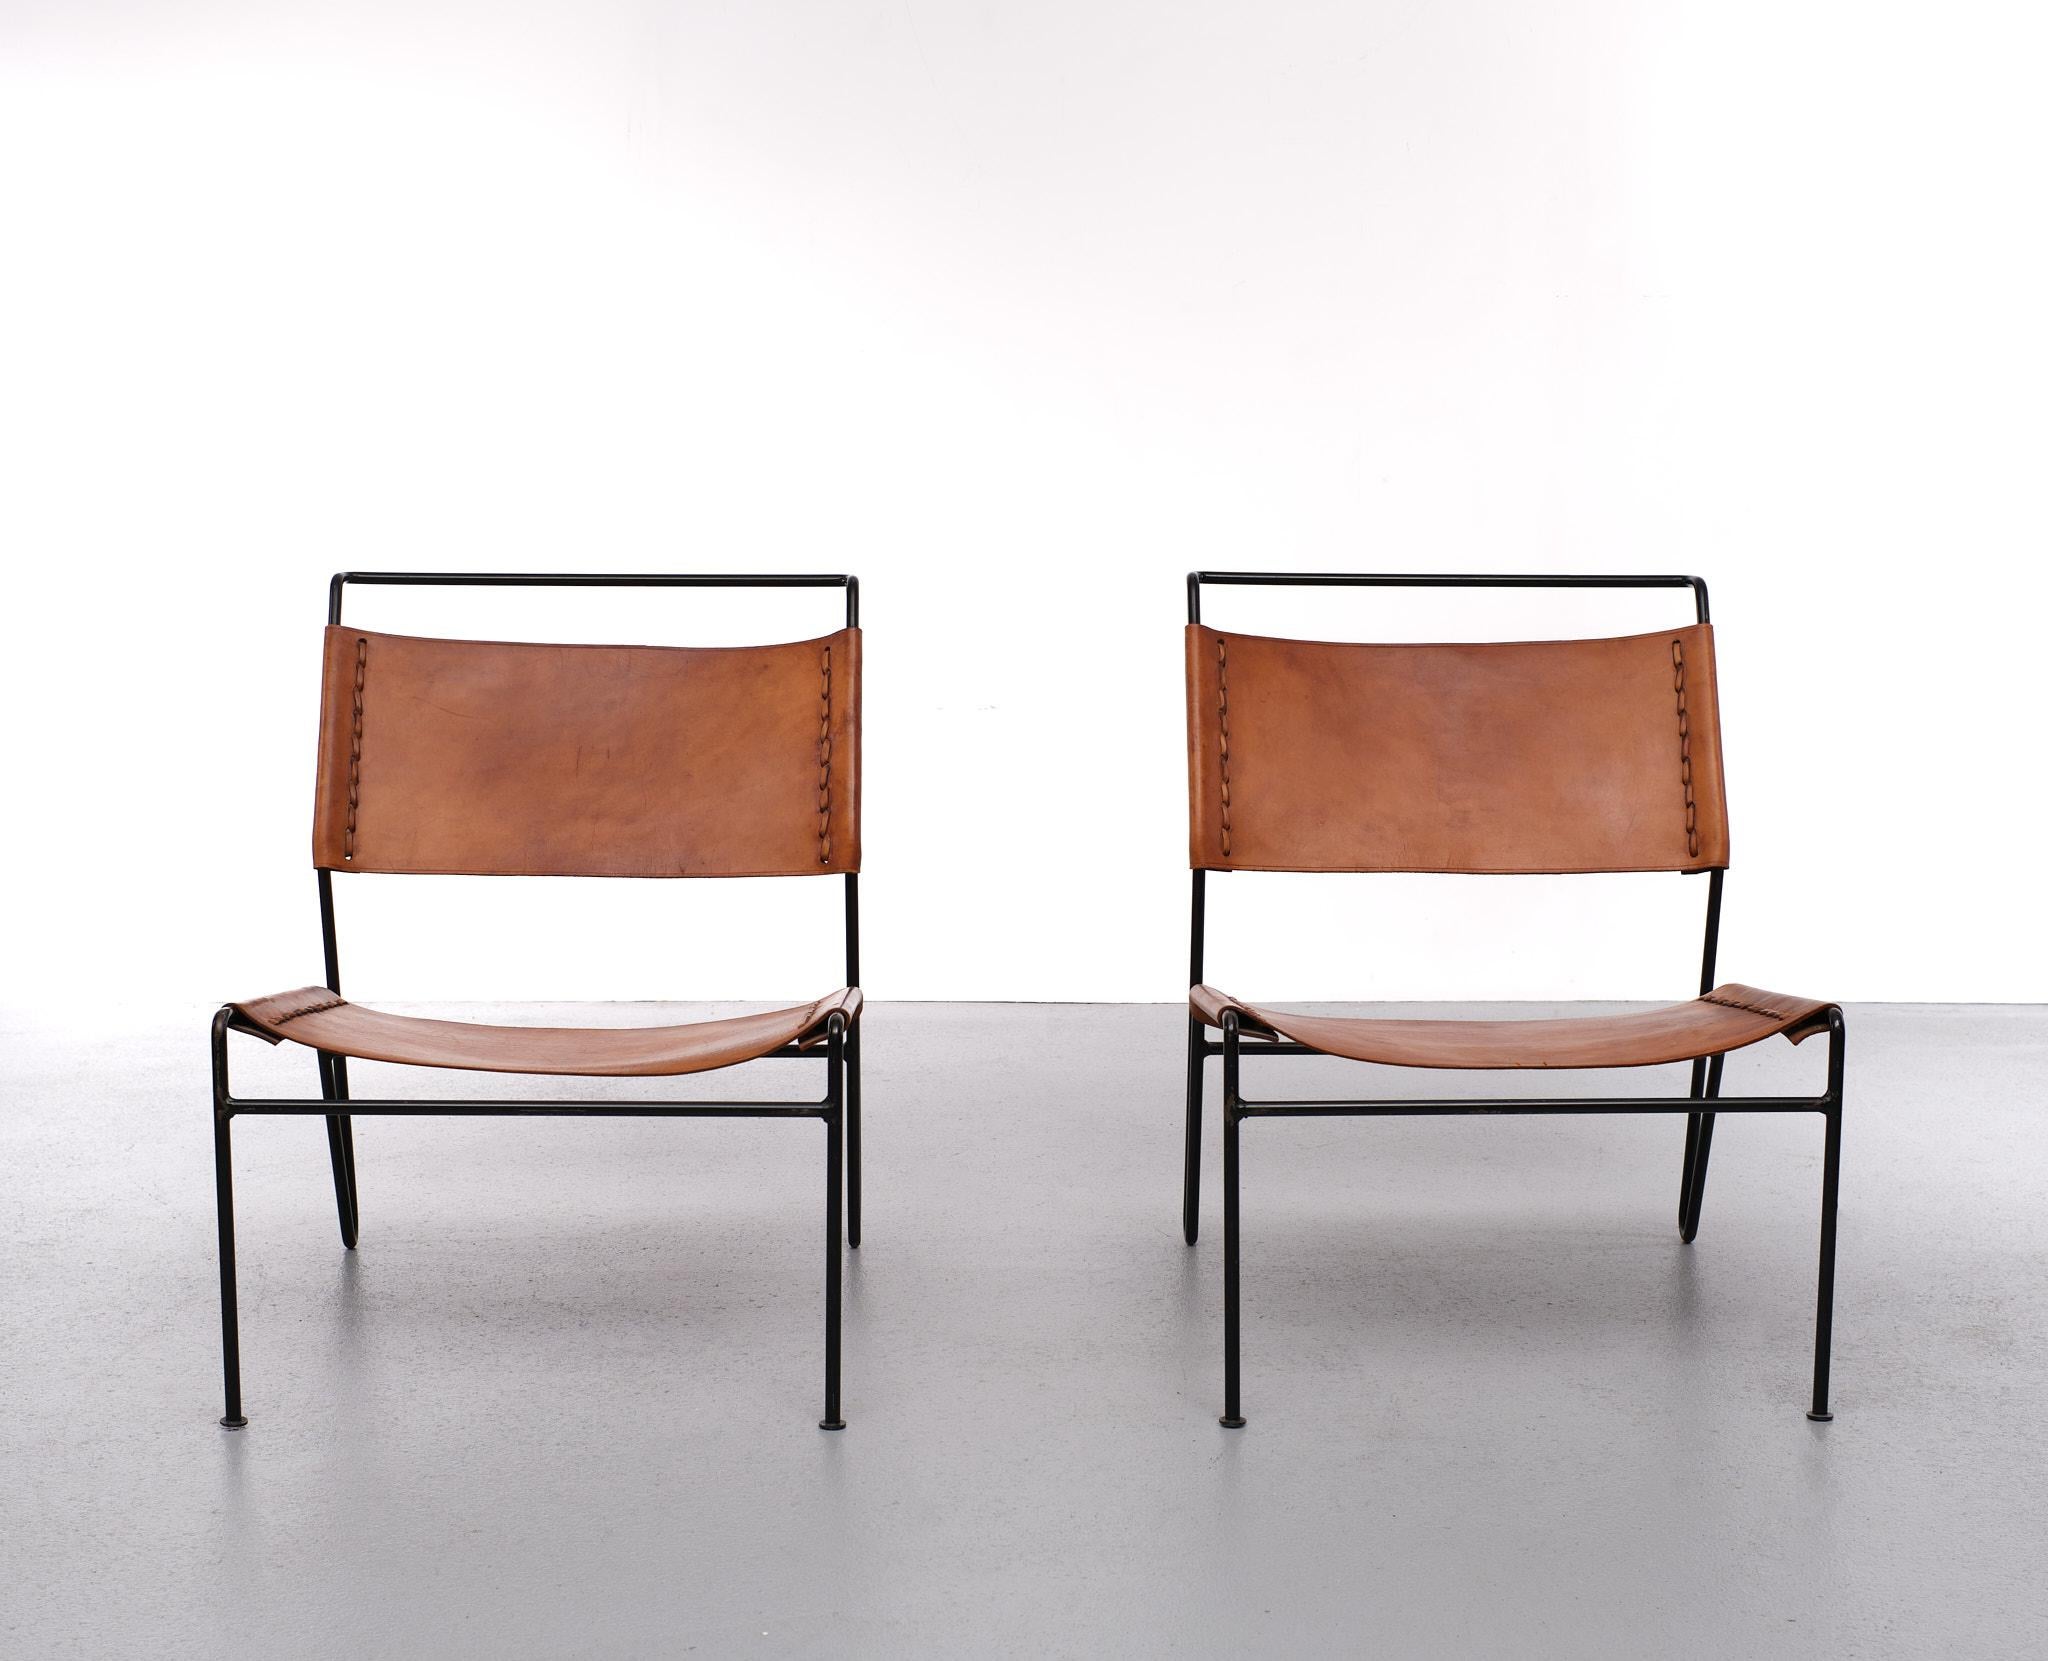 A fantastic pair of lounge chairs designed by A. Dolleman, manufactured by Metz & Co in the Netherlands around 1950. The chairs have very appealing, minimalist design. Their thin black lacquered metal bases are nicely bent in to shape. The seat and